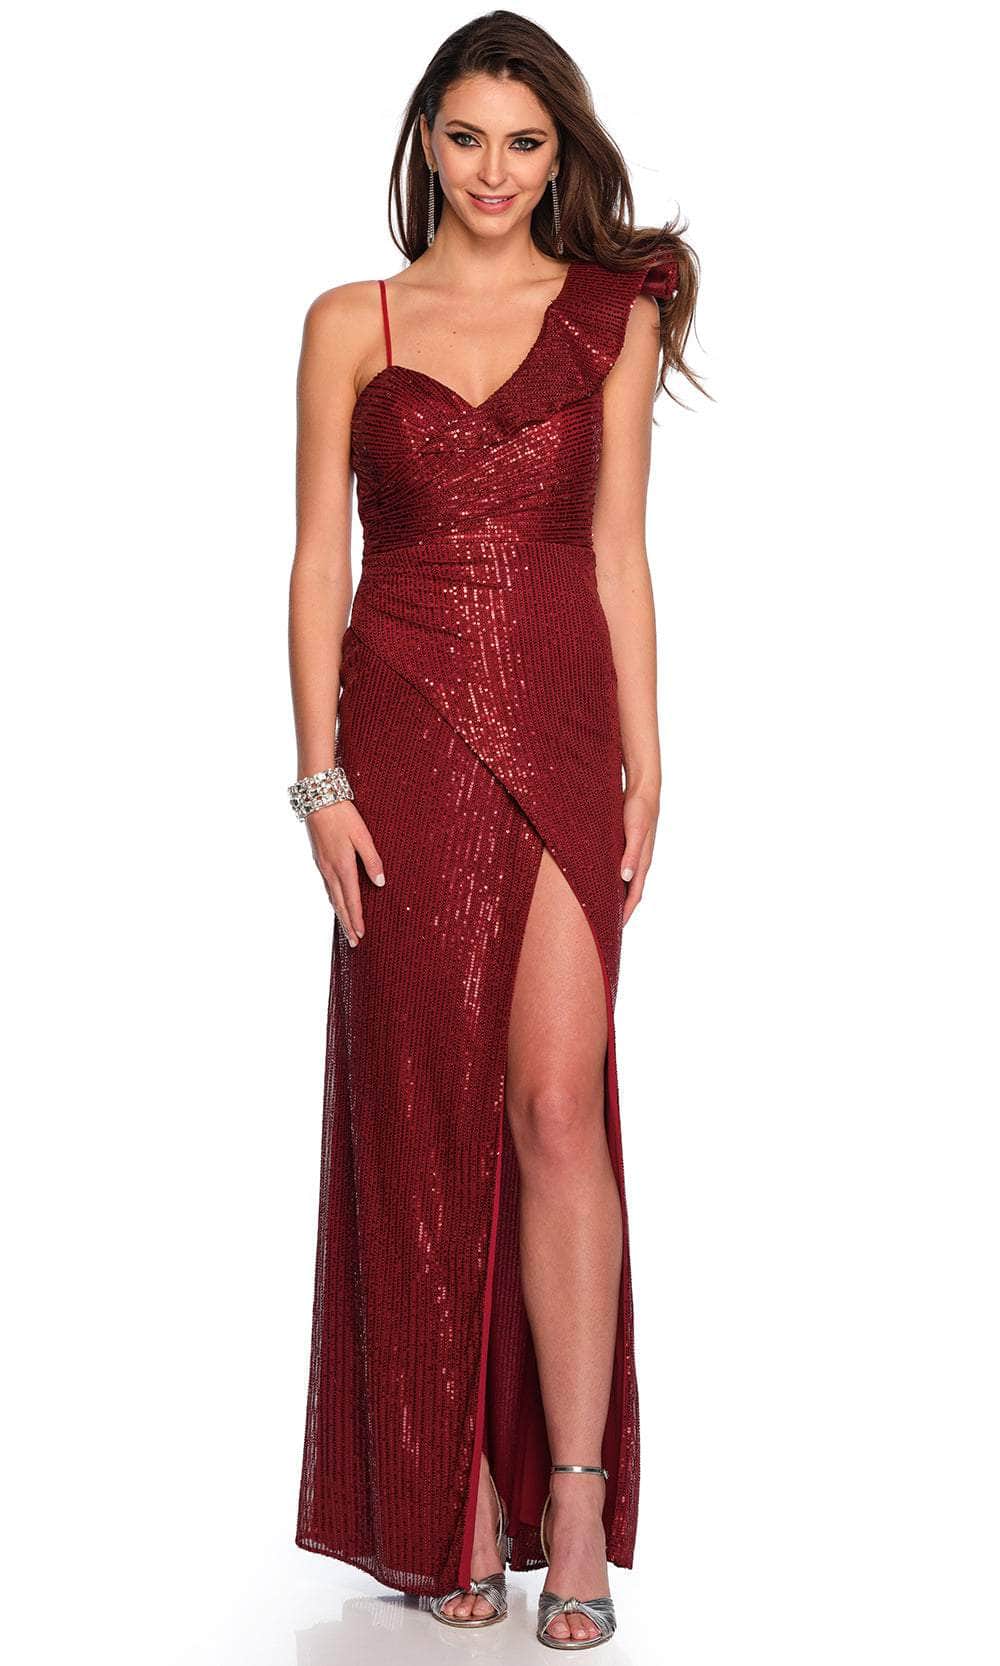 Dave & Johnny 11214 - Ruffled Sleeve Sequin Prom Gown
